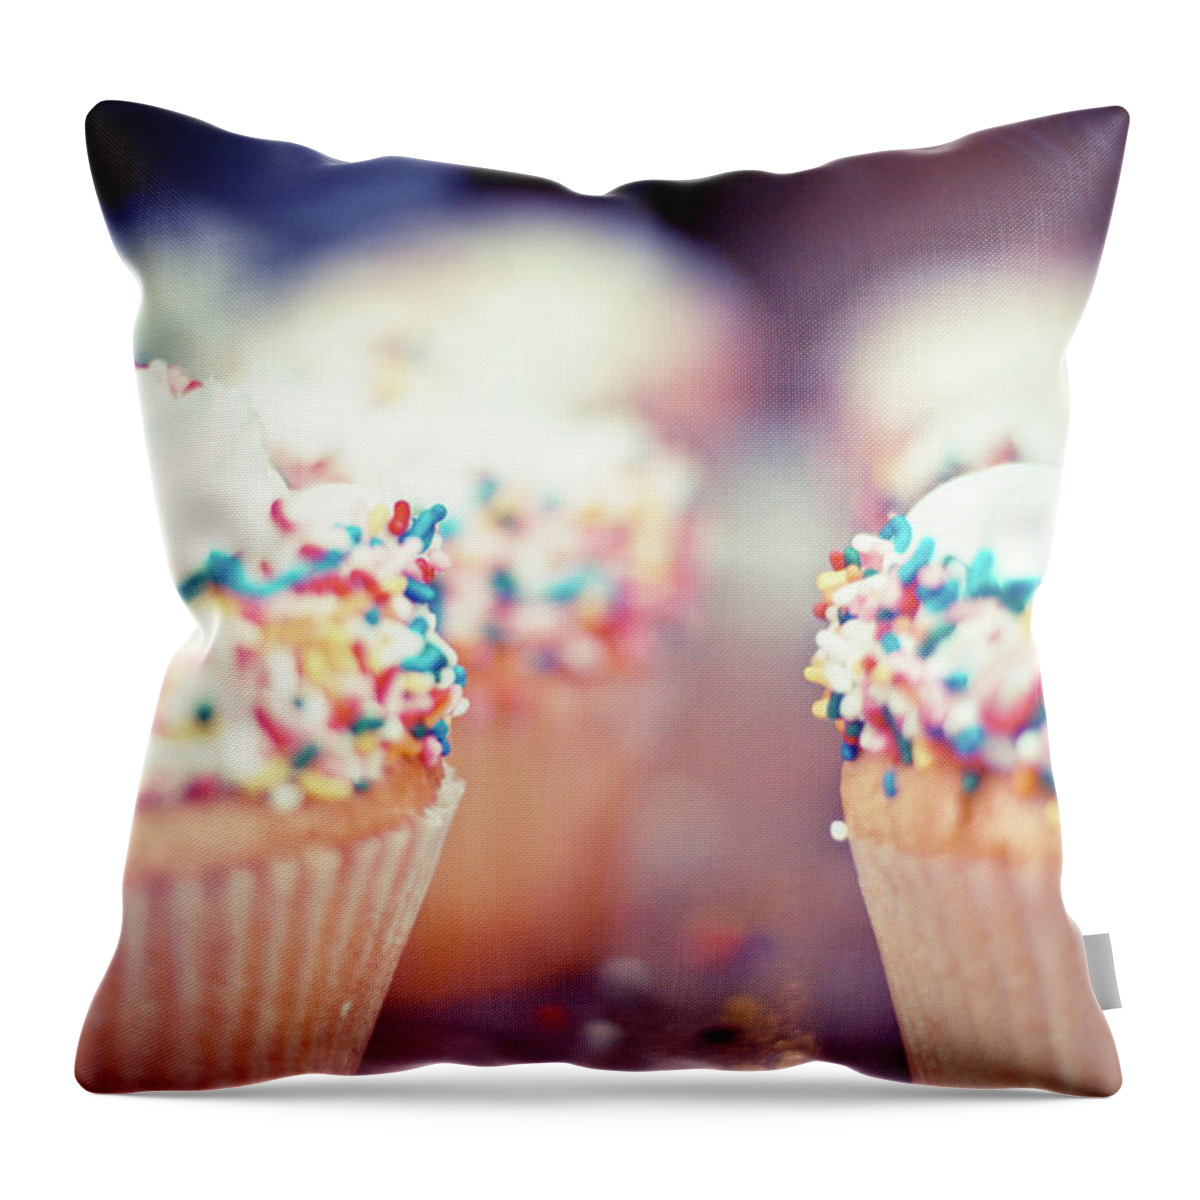 Unhealthy Eating Throw Pillow featuring the photograph Cupcakes by Carmen Moreno Photography